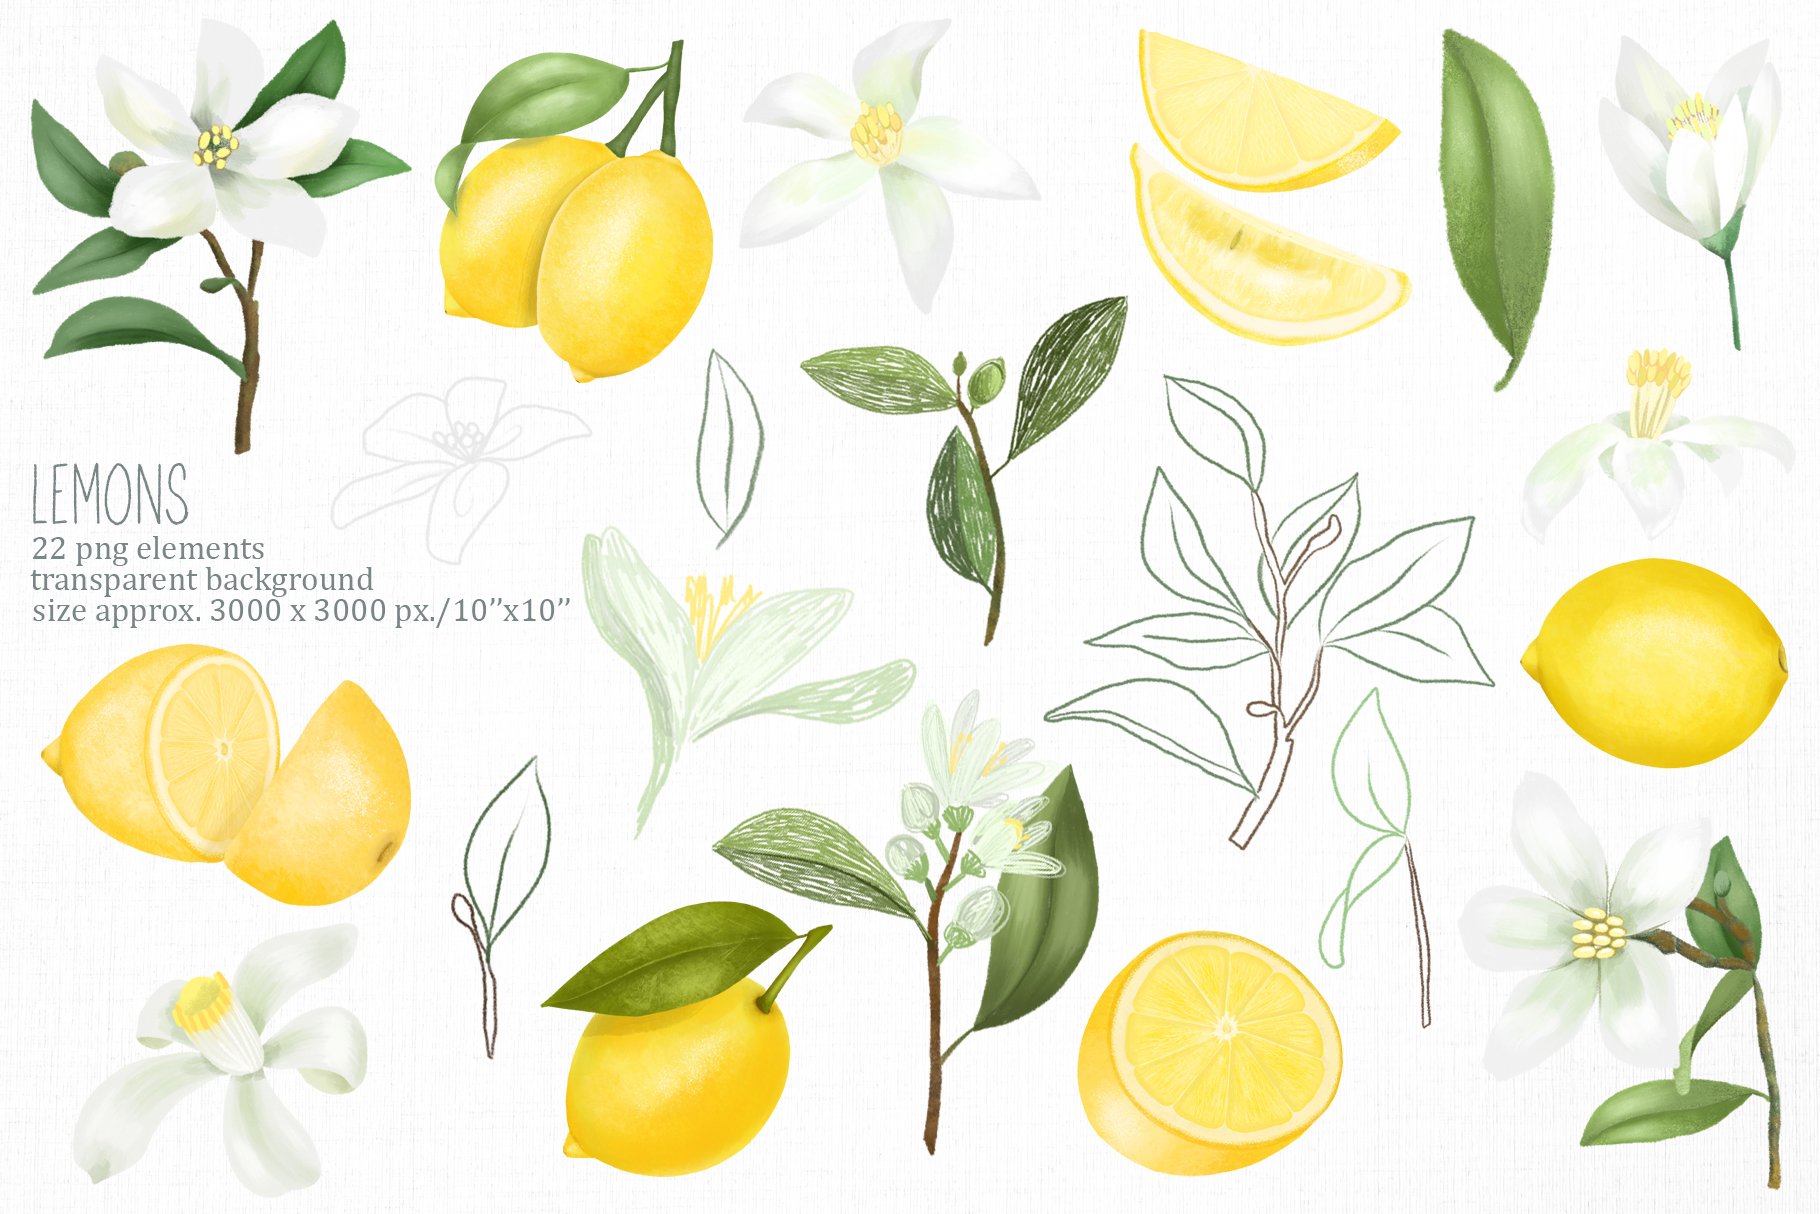 Lemons & limes collection preview image.